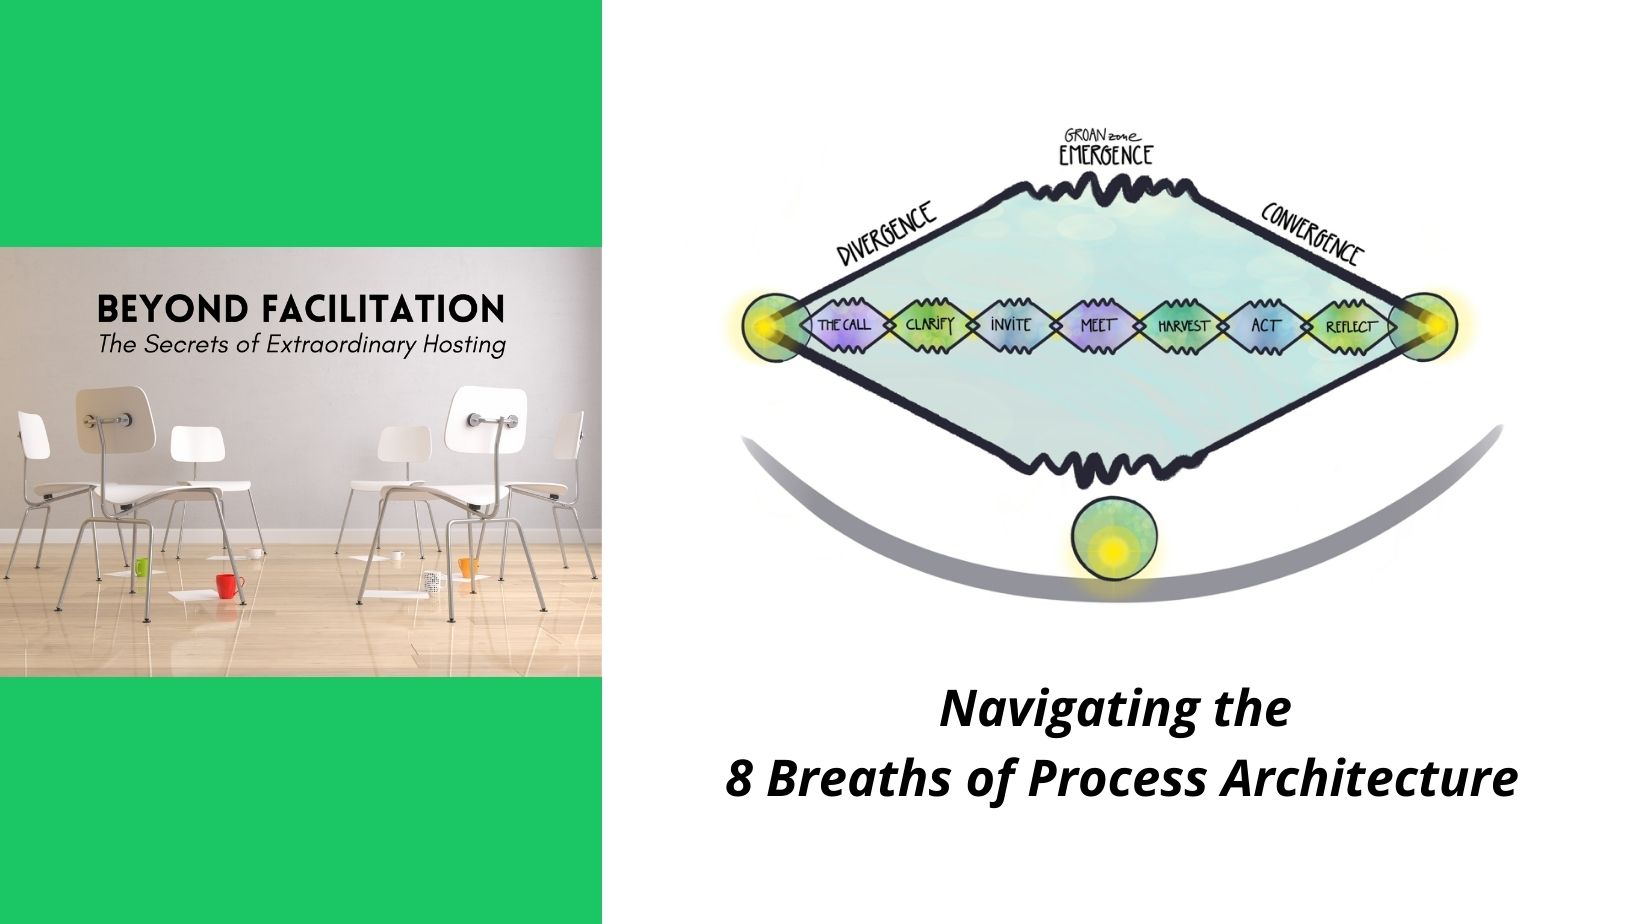 BEYOND FACILITATION: Navigating the 8 Breaths of Process Architecture